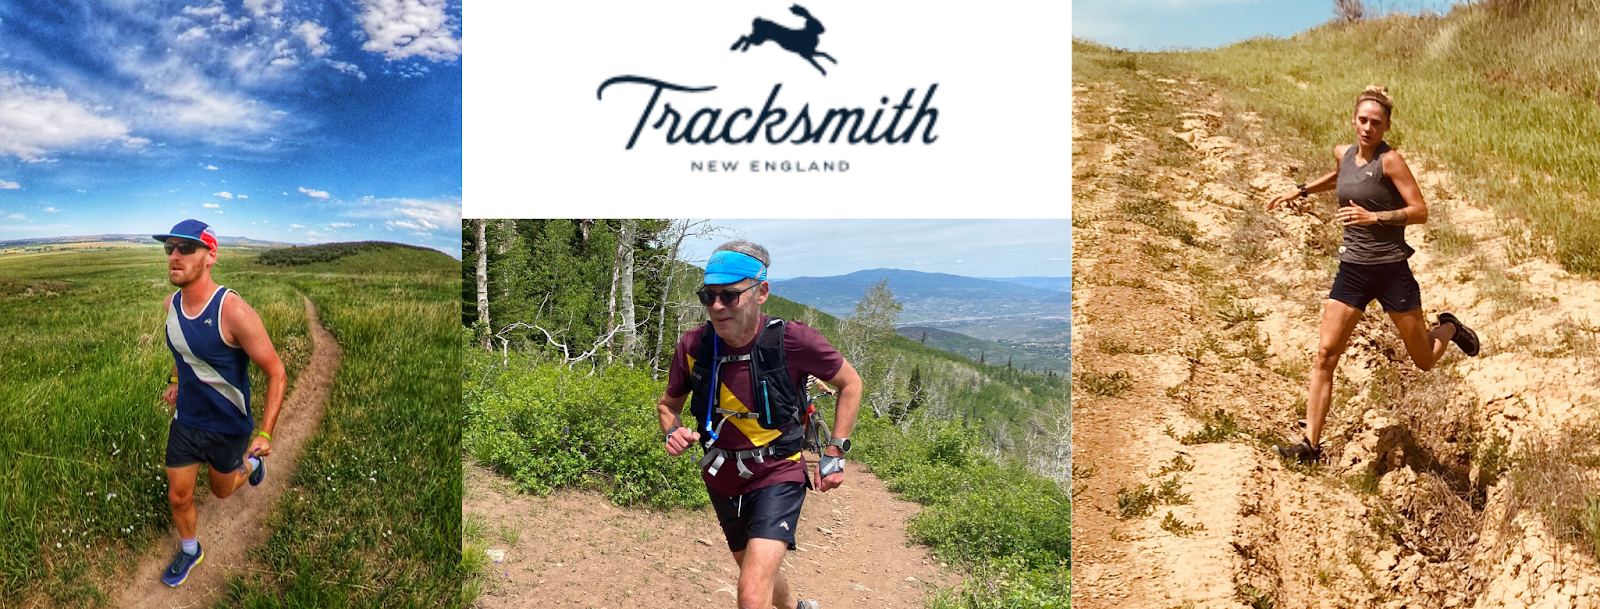 Road Trail Run: Tracksmith Multi Tester Men's and Women's Apparel Review:  Front of the Running Class in Style and Performance